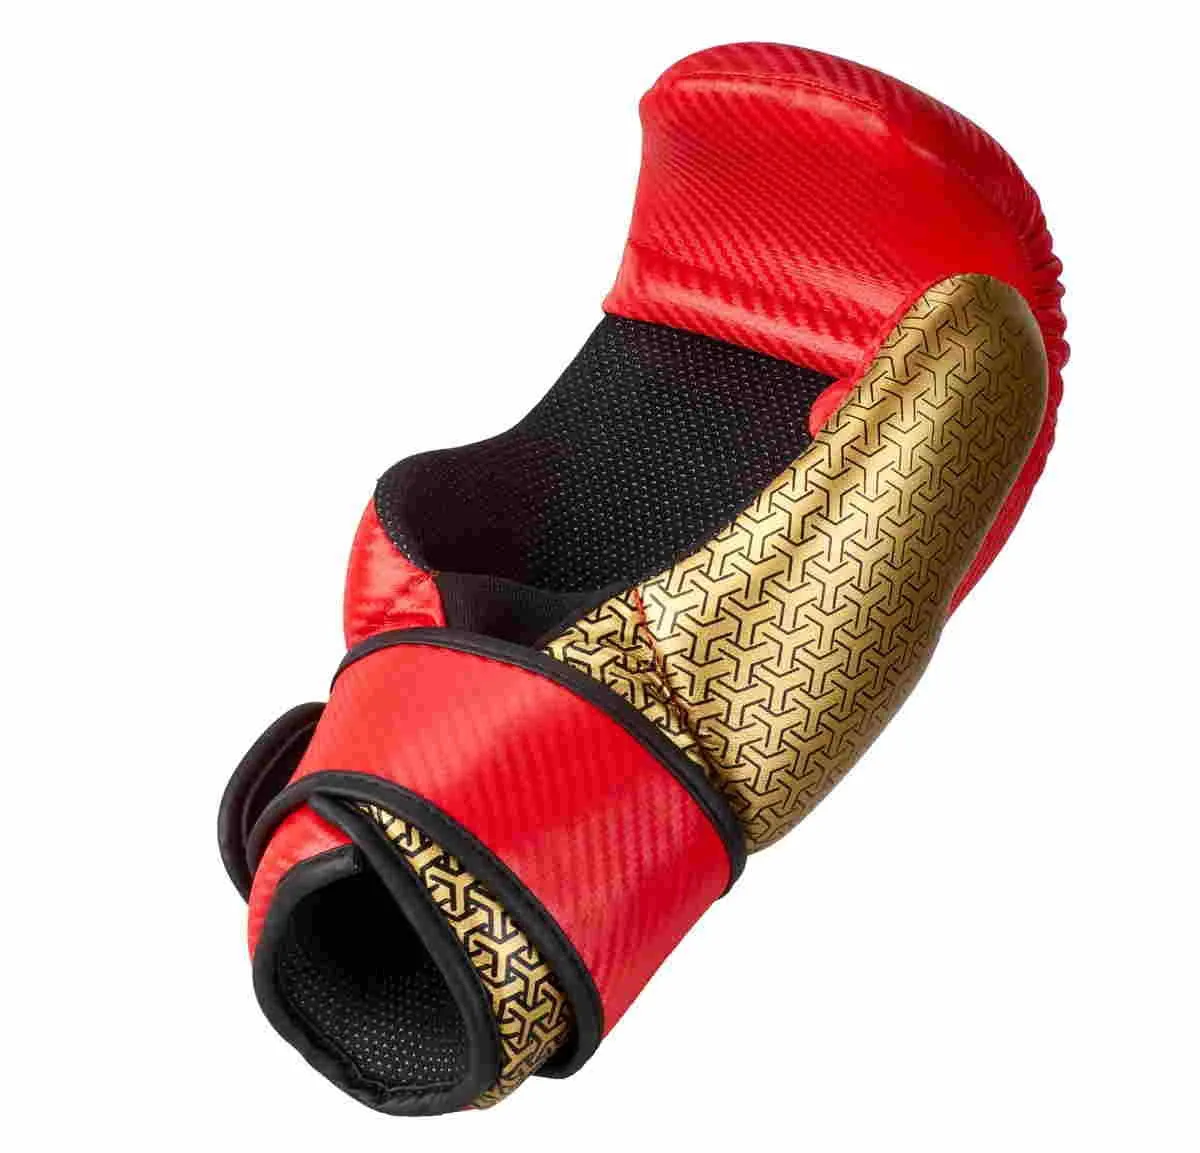 adidas Pro Point Fighter 300 Kickboxing Gloves red|gold